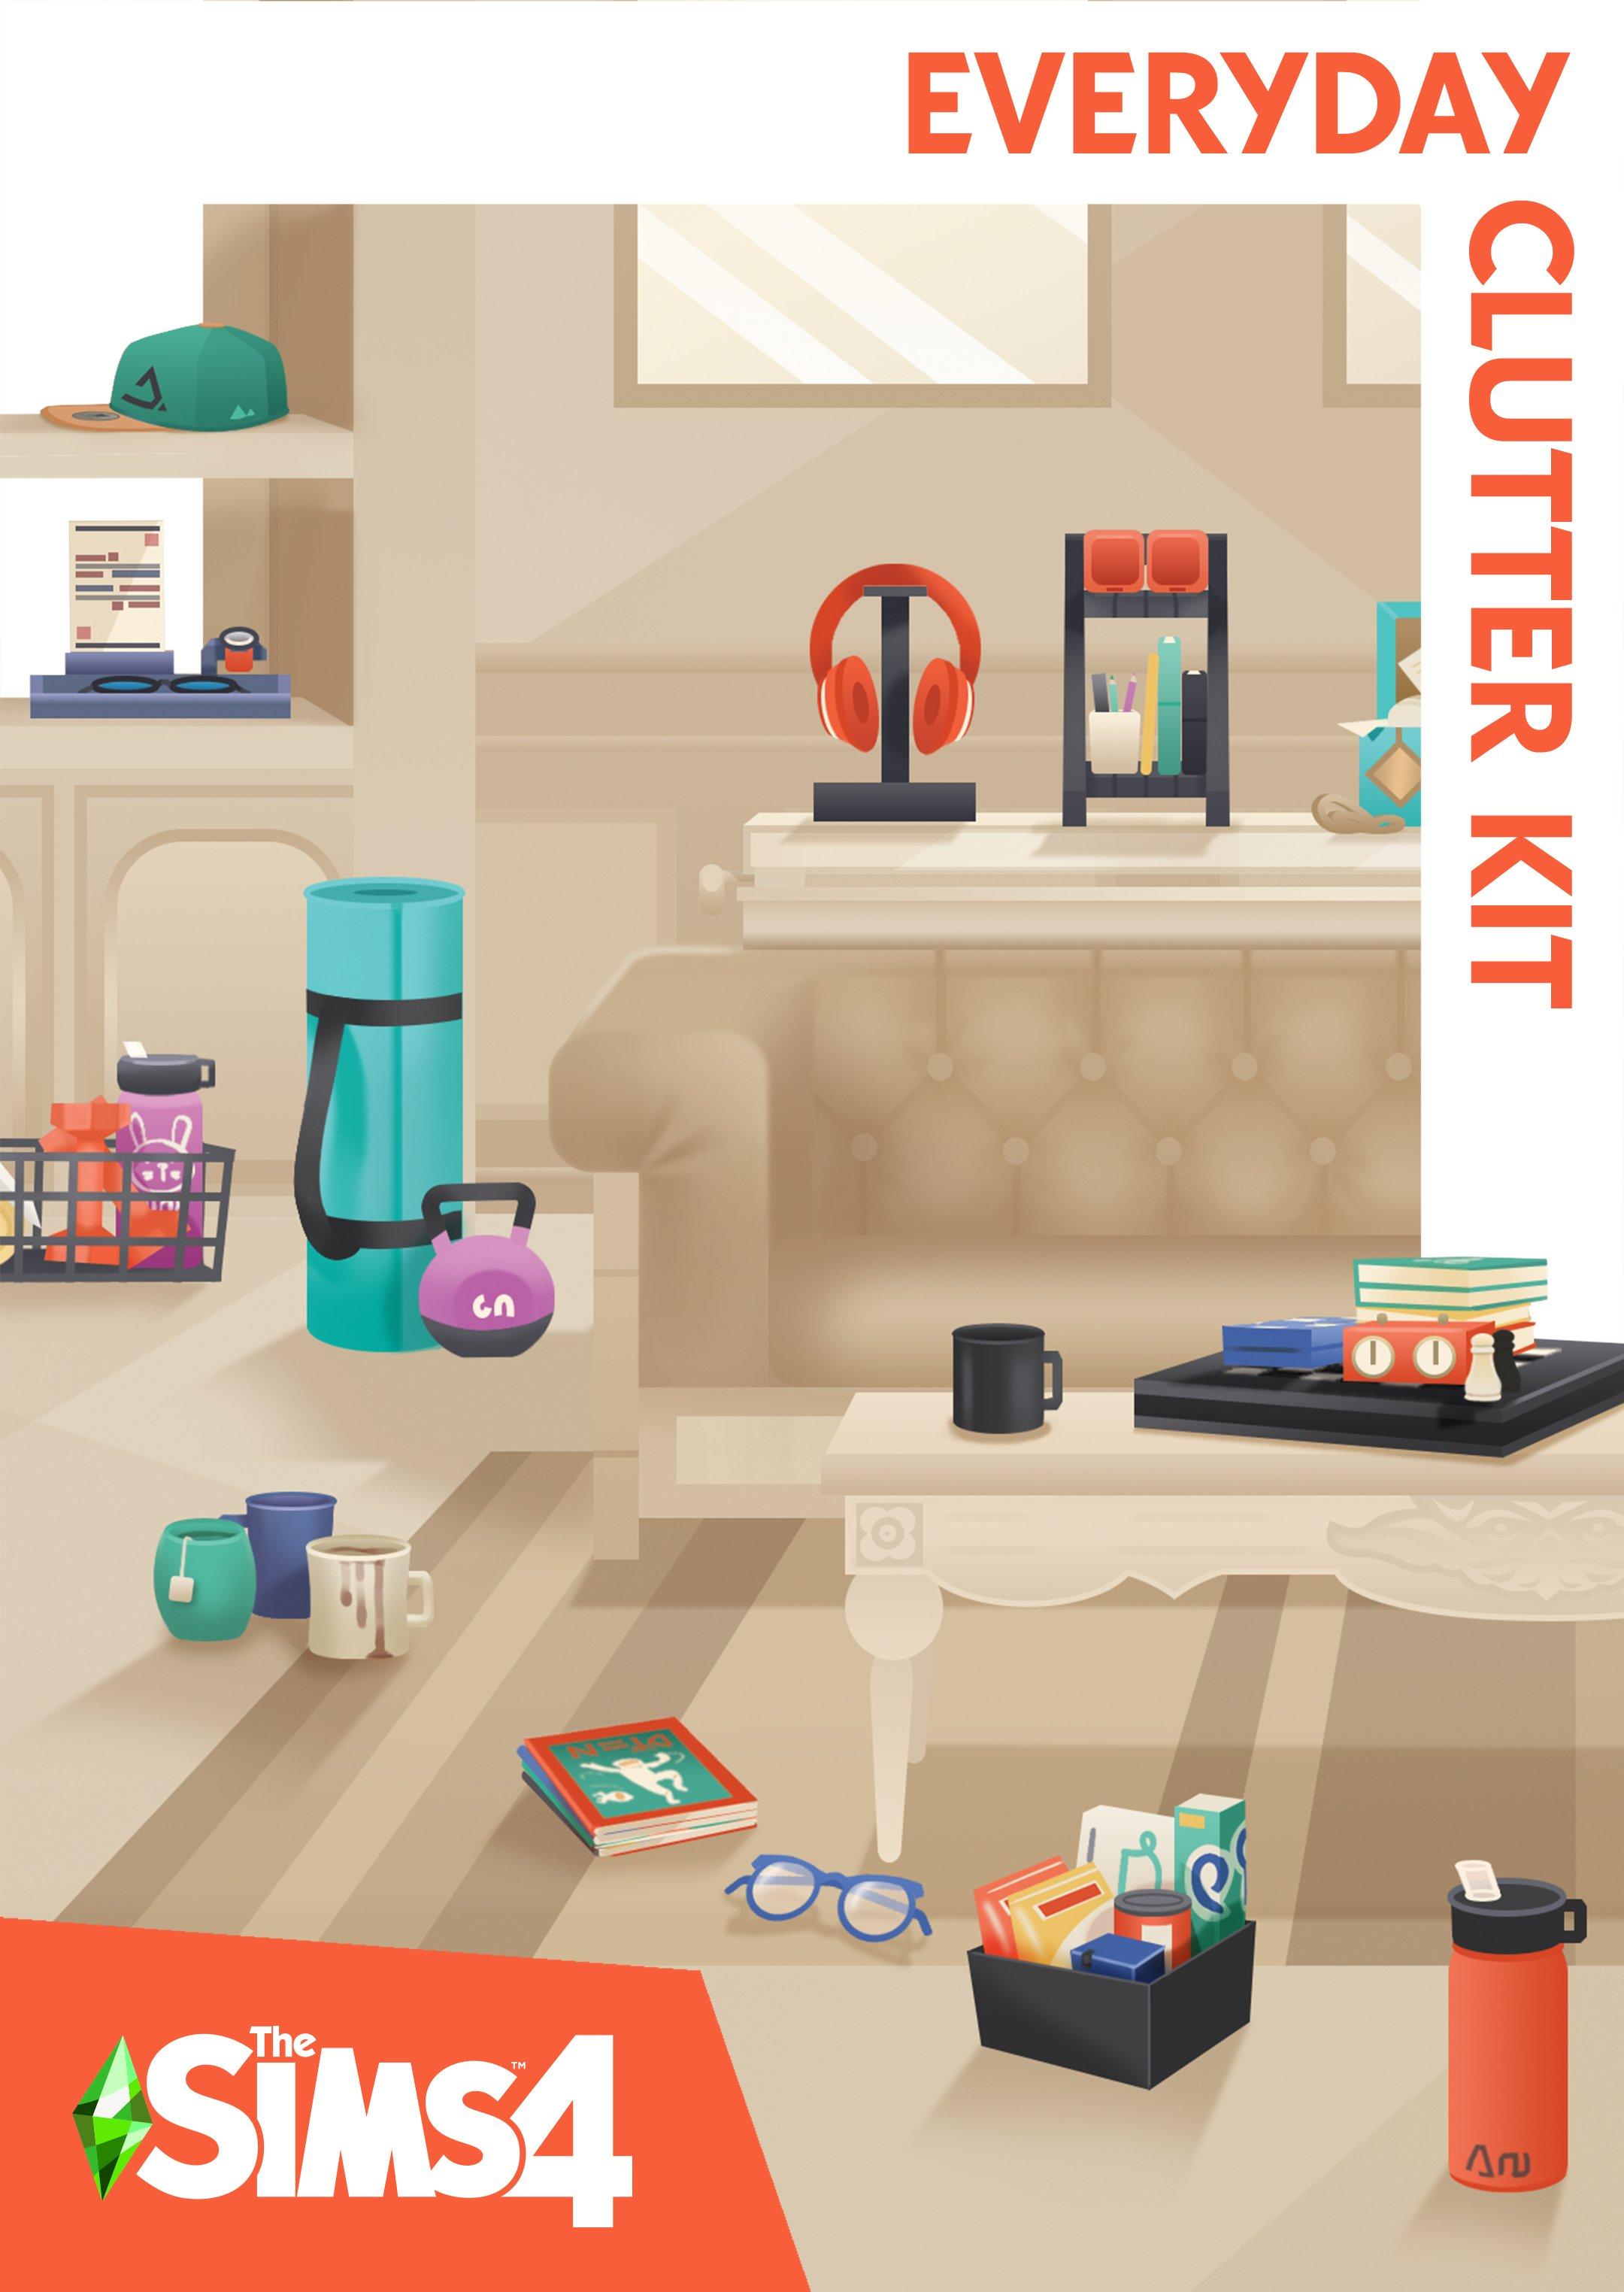 Electronic Arts The Sims 4 Everyday Clutter Kit DLC - PC EA app